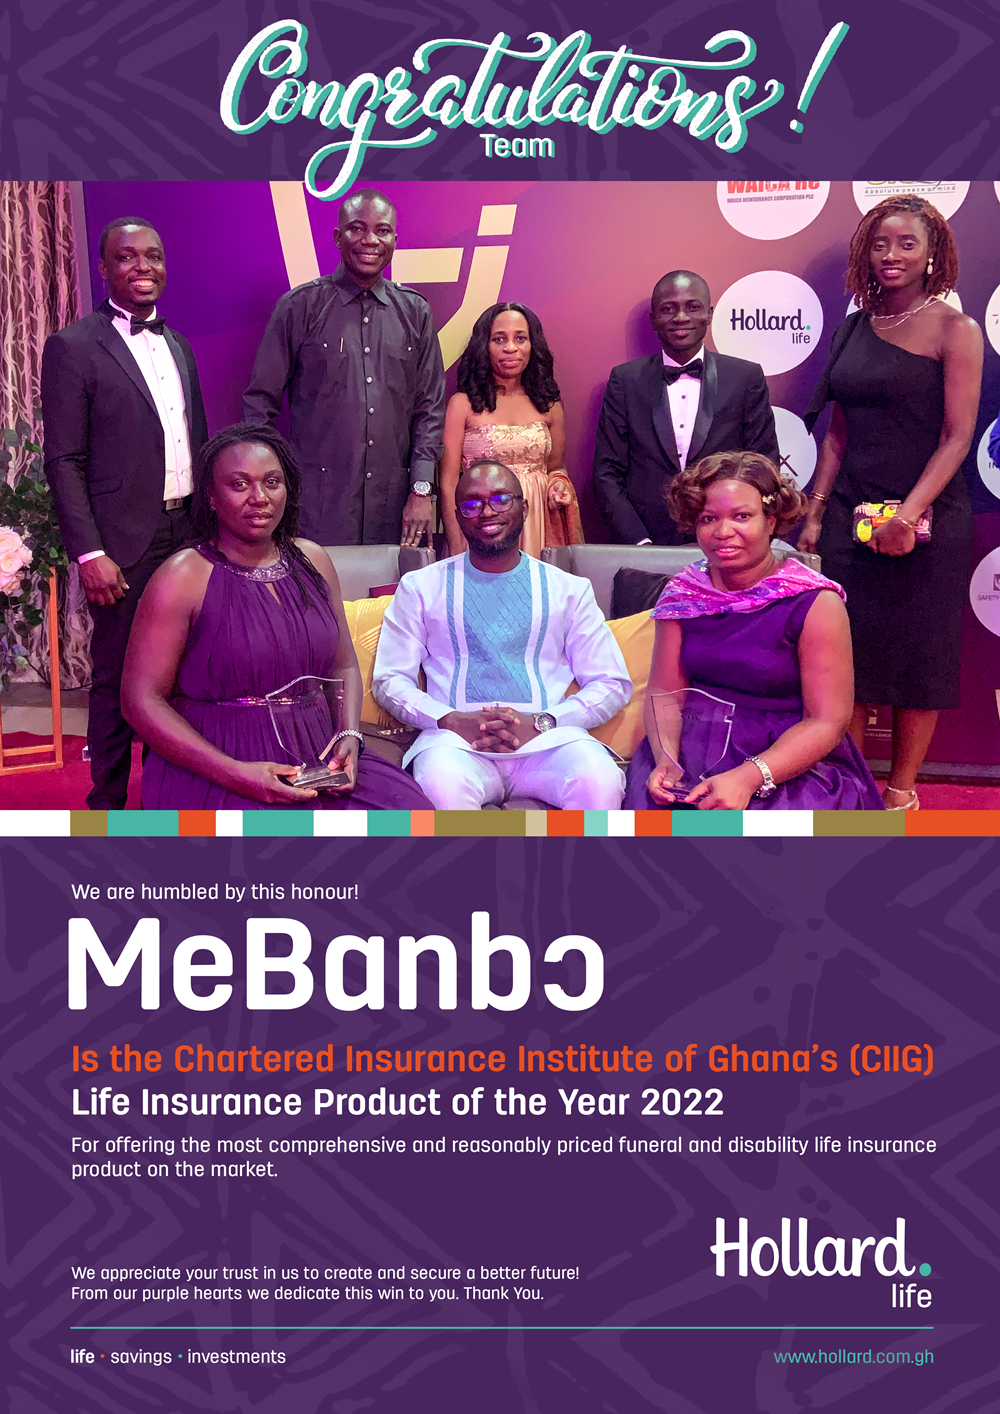 Hollard Life’s MeBanbo is Chartered Insurance Institute’s Product of the Year